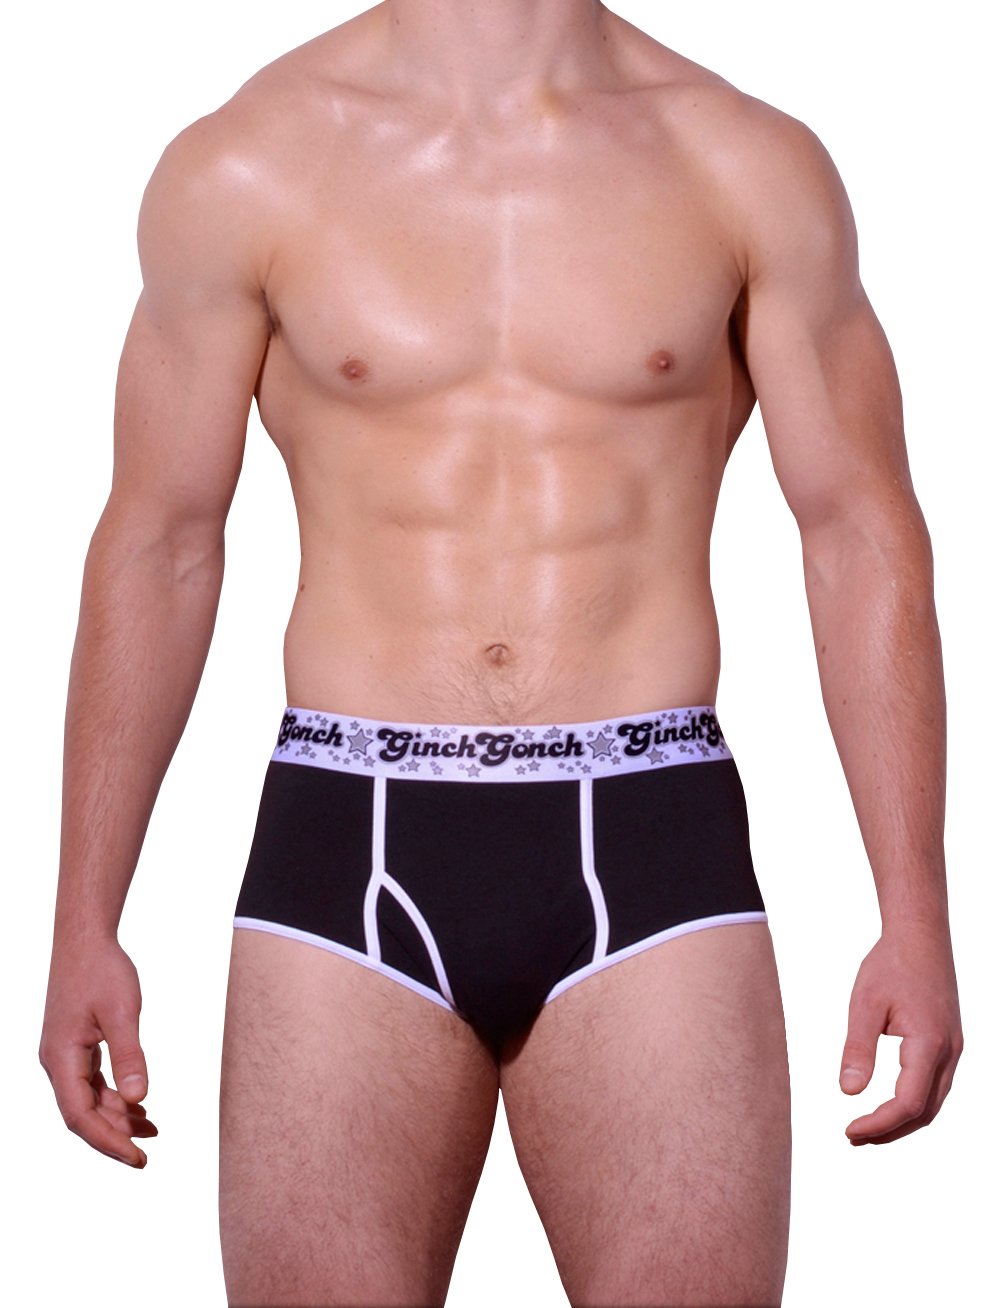 Ginch Gonch Black Magic Brief - Men's Underwear black jockey y front with white trim and printed waistband front